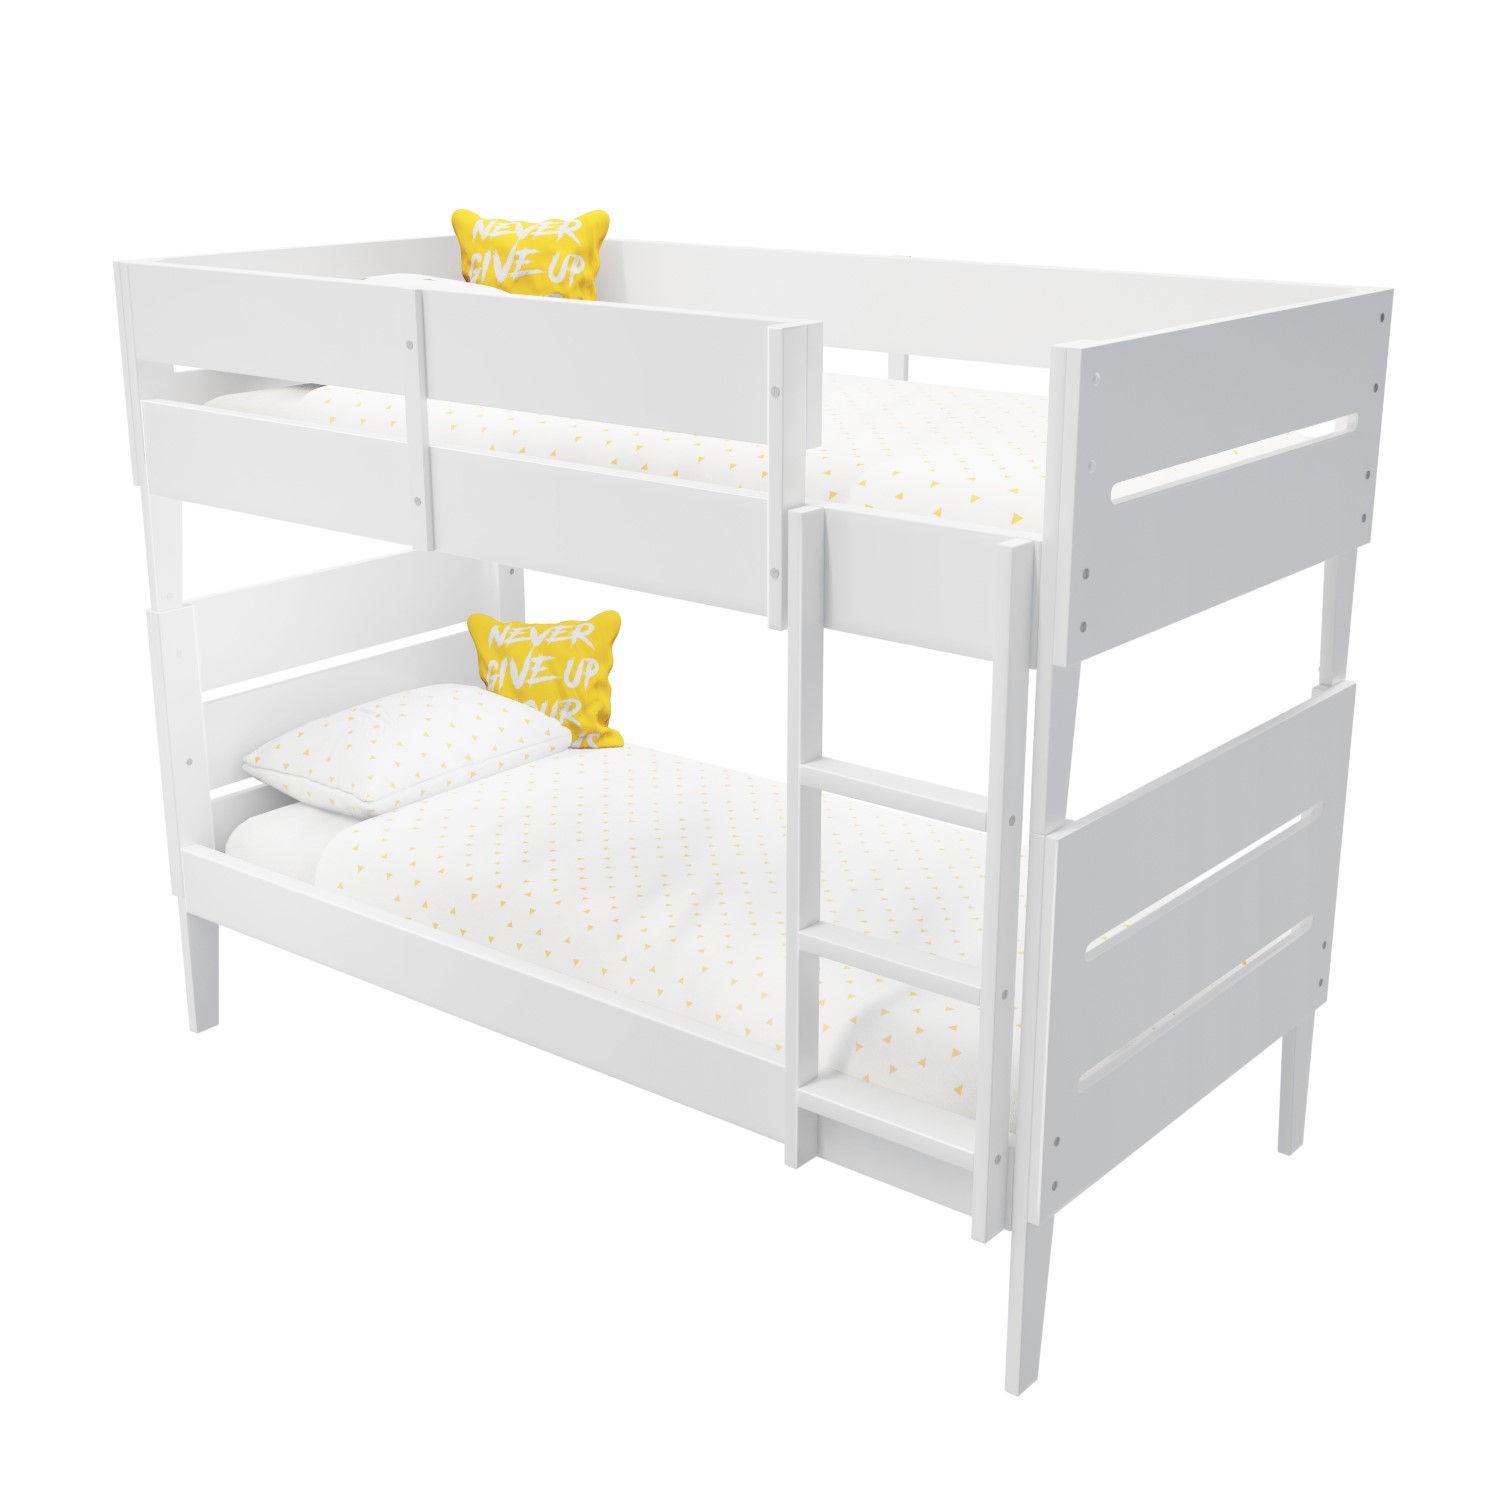 White Wooden Bunk Bed With Scandi, Wood Bunk Beds Single